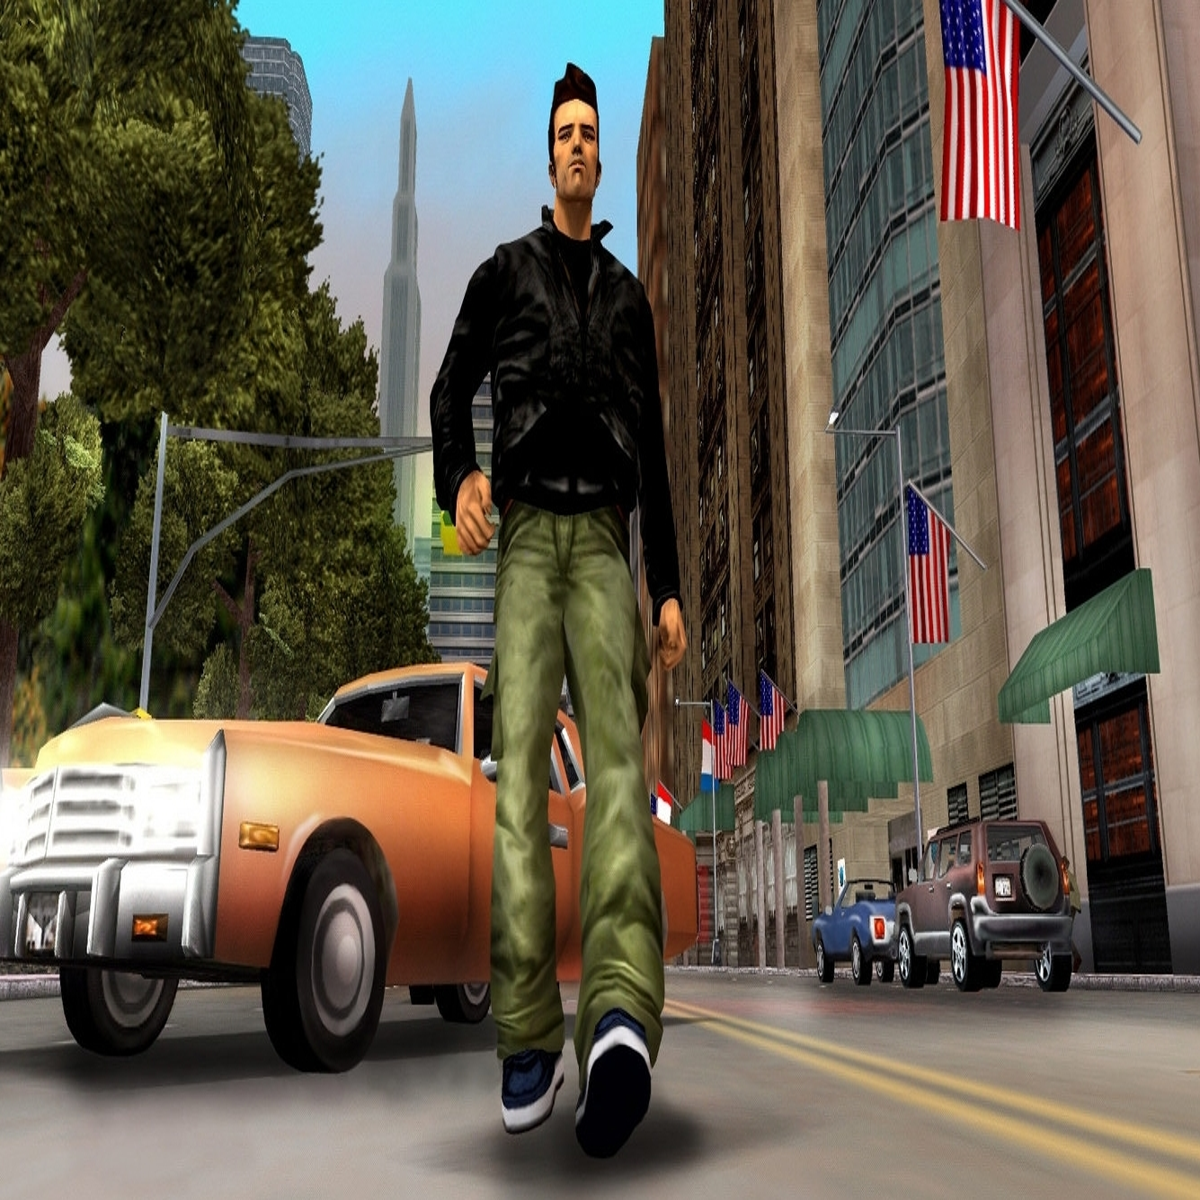 Grand Theft Auto 3, Vice City and San Andreas remasters reportedly real